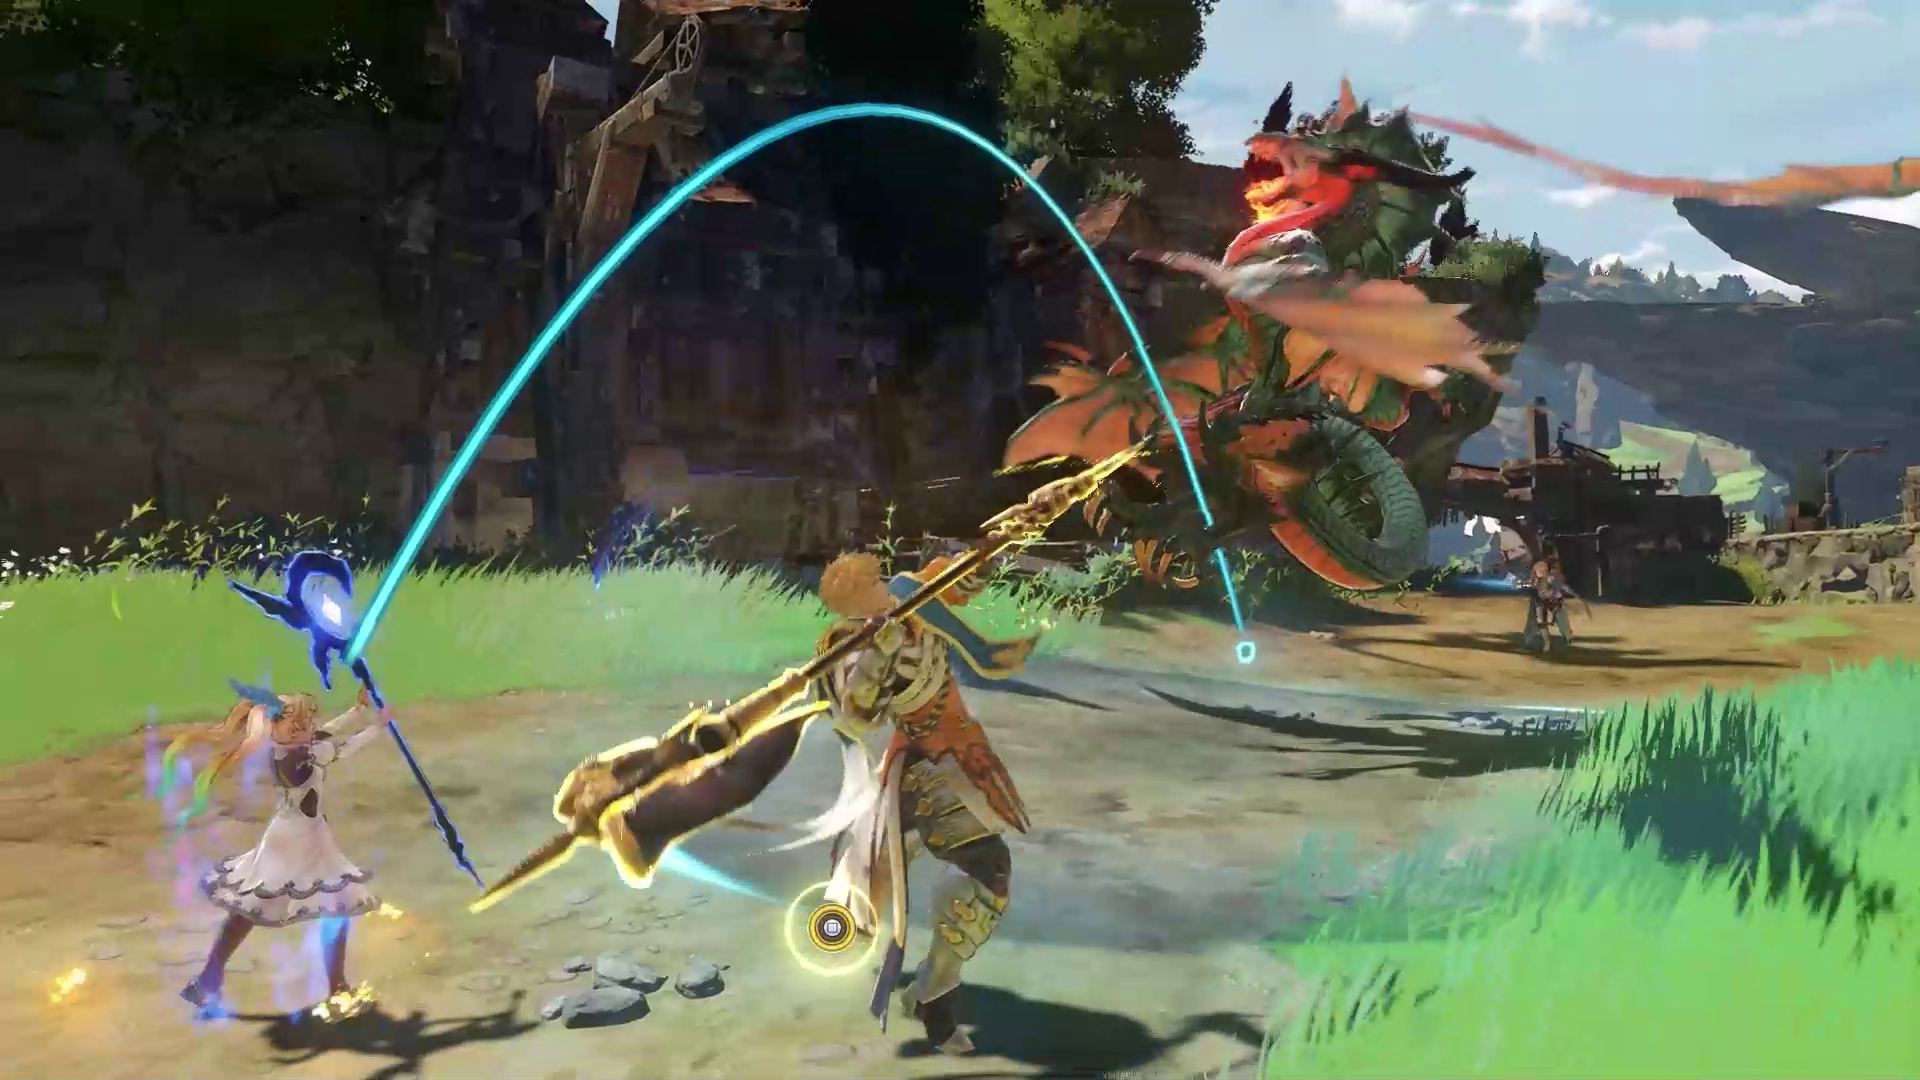 The RPG High Will Endure in Granblue Fantasy: Relink